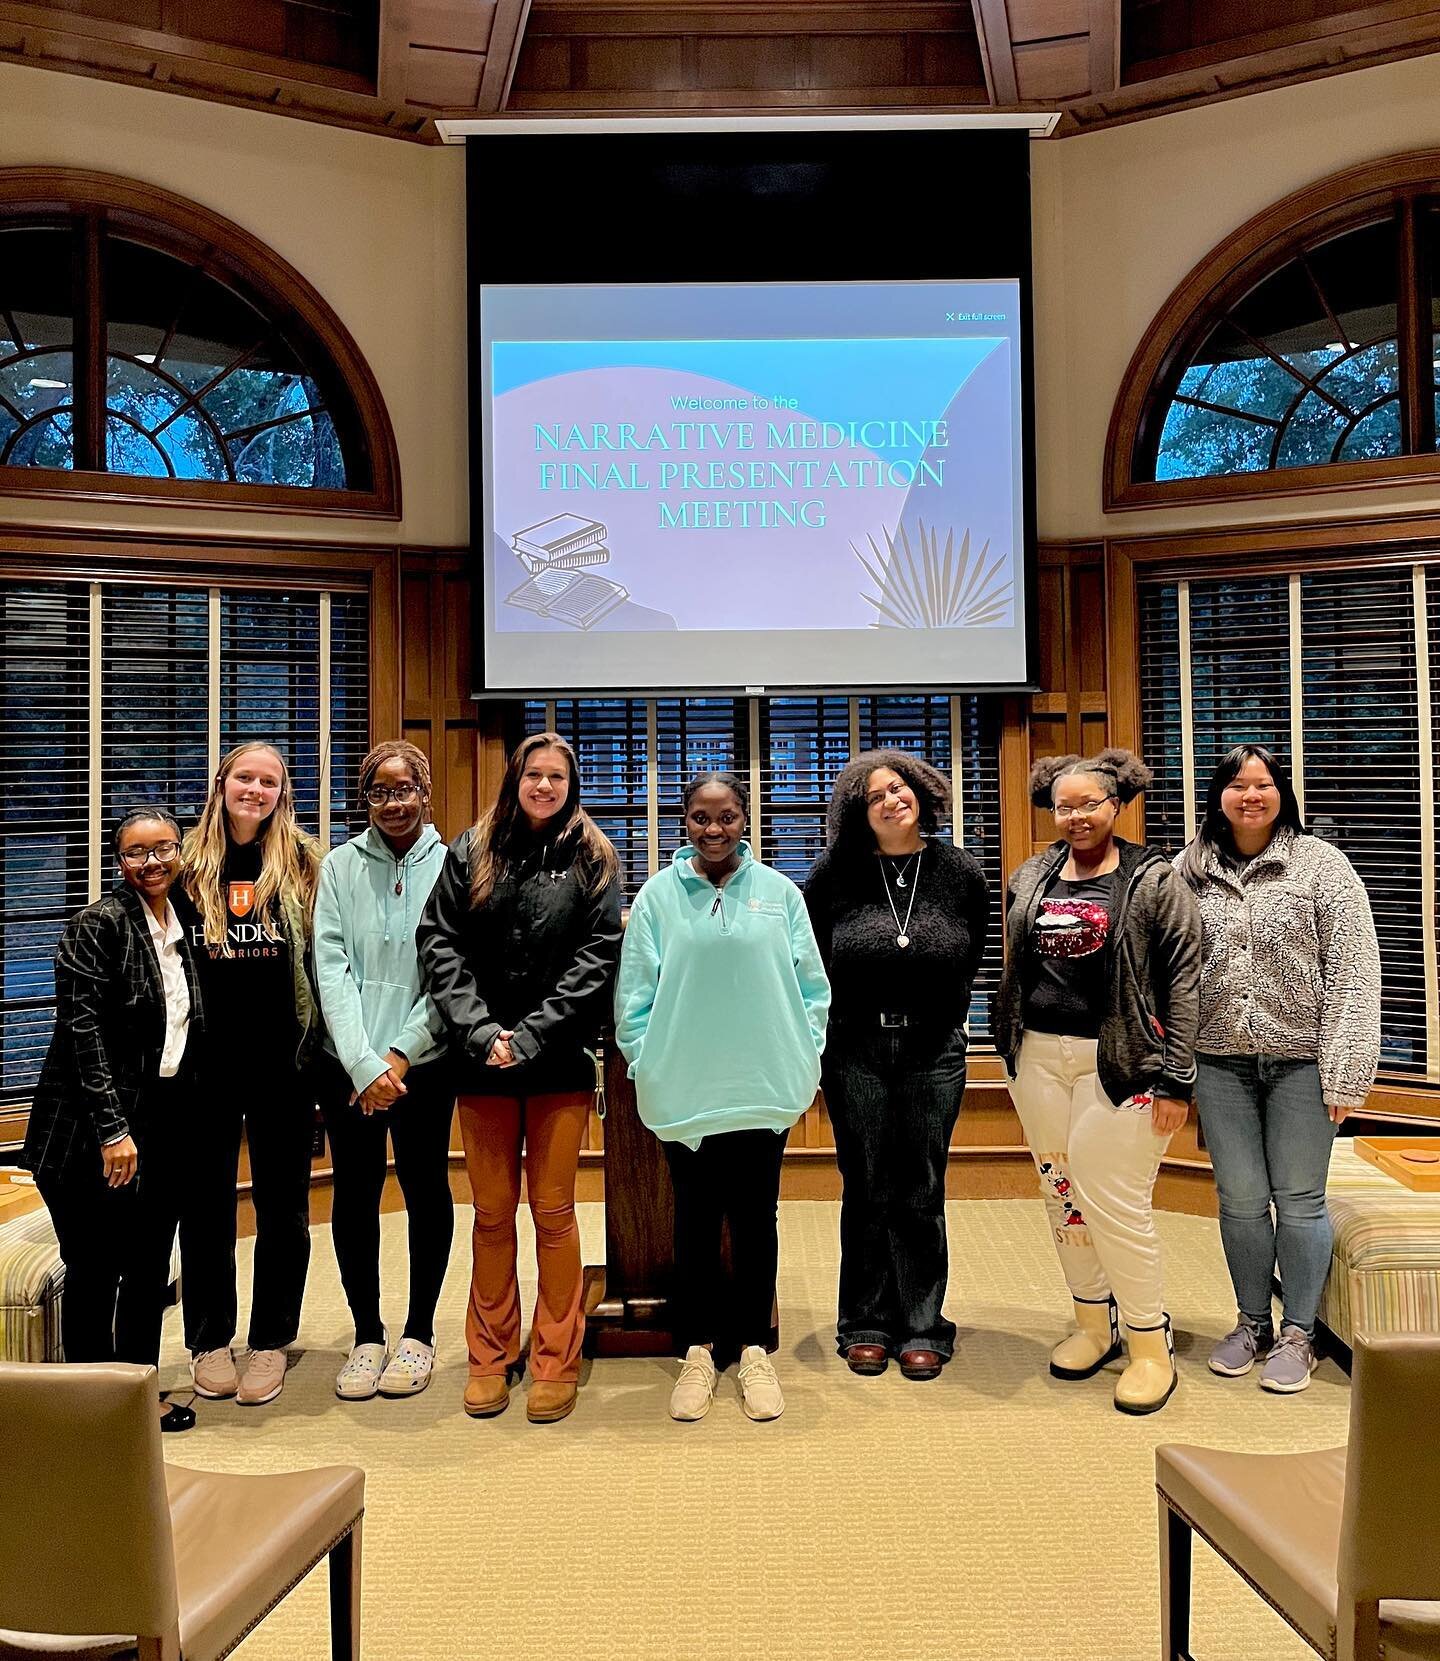 🎉 Bravo Narrative Medicine Reading &amp; Writing Group on your final presentations!

This student-led group focuses on reading and writing creative works about healthcare, wellness, and disease. Participants of all majors are welcome and include man